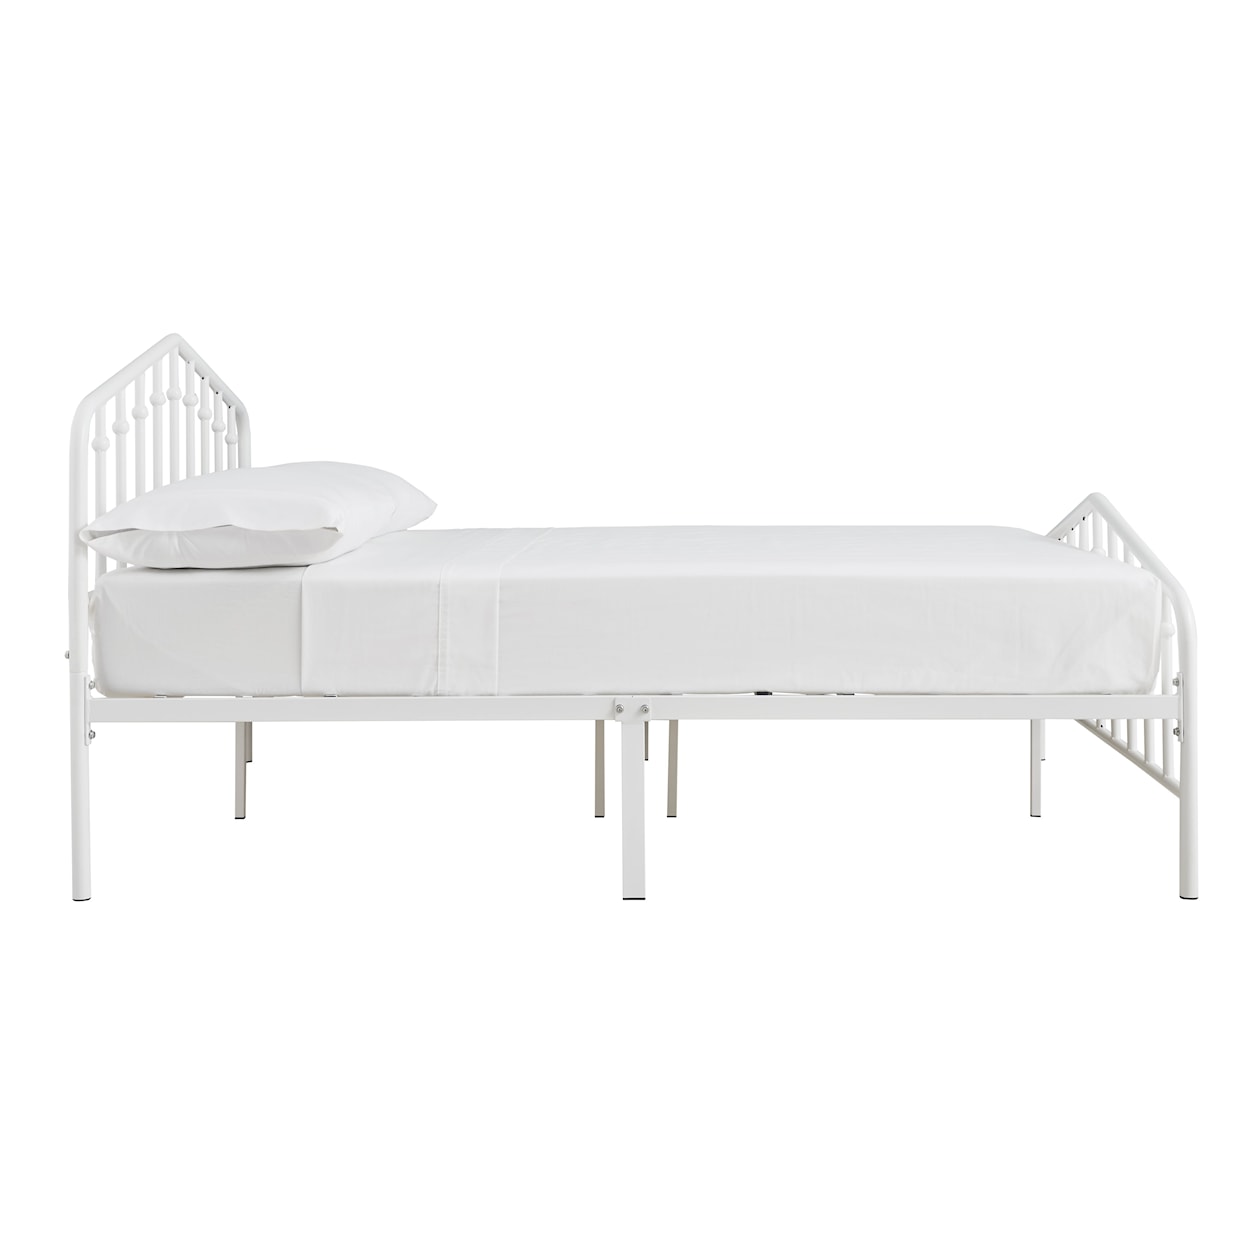 Signature Design by Ashley Furniture Trentlore Full Metal Bed